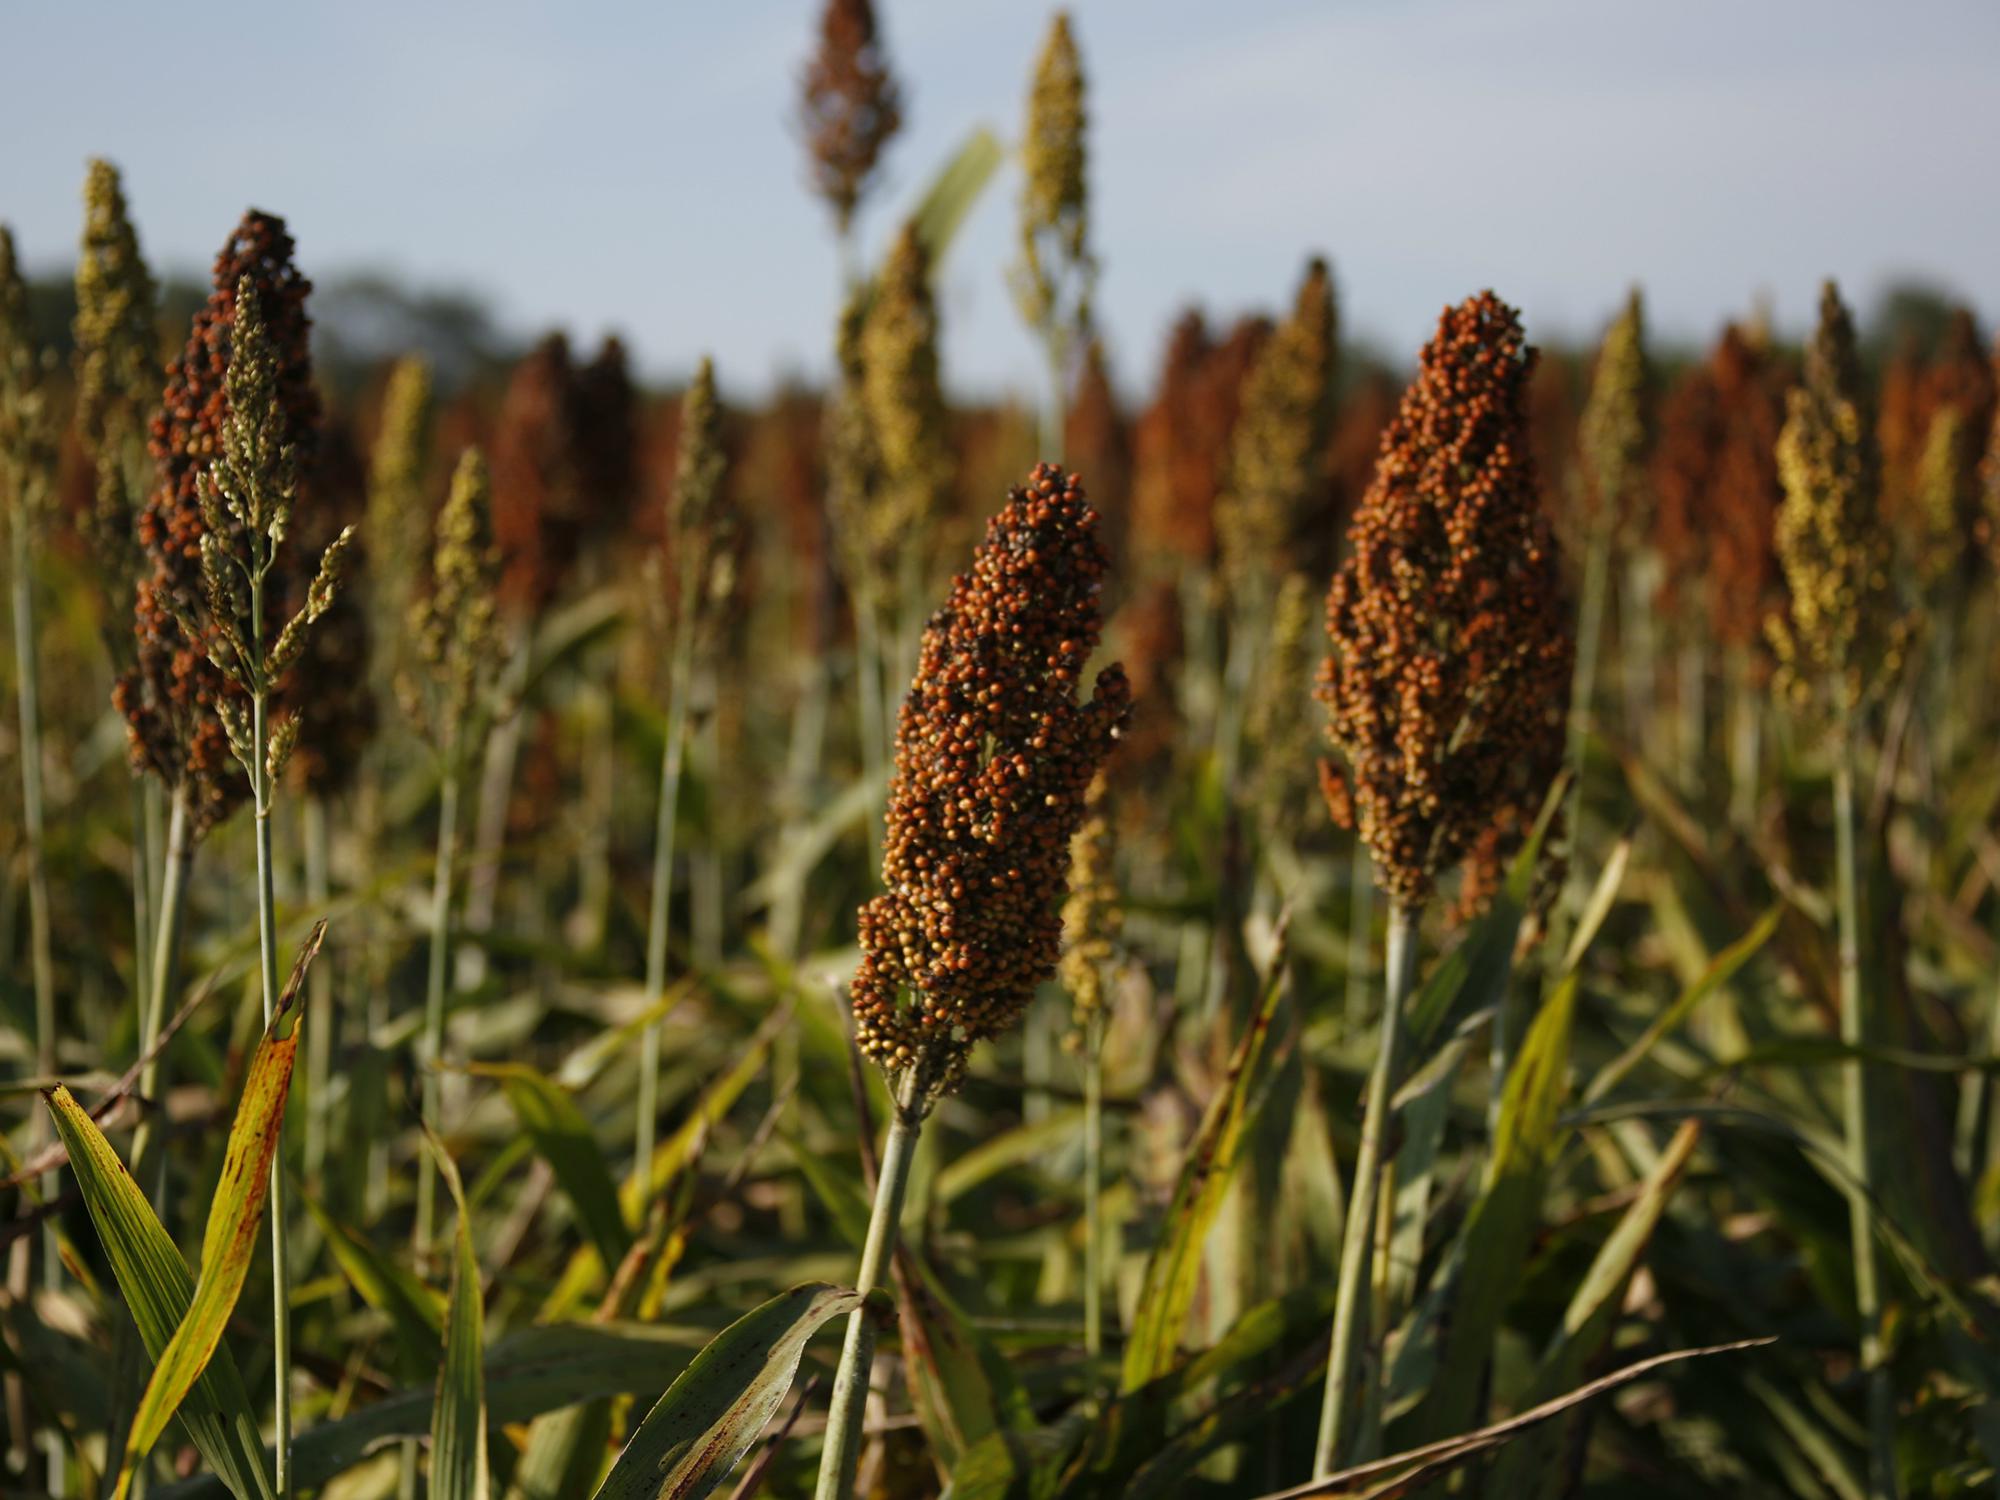 Close up of a head of grain sorghum full of tiny brown seeds, along with other plant heads in the field around it.